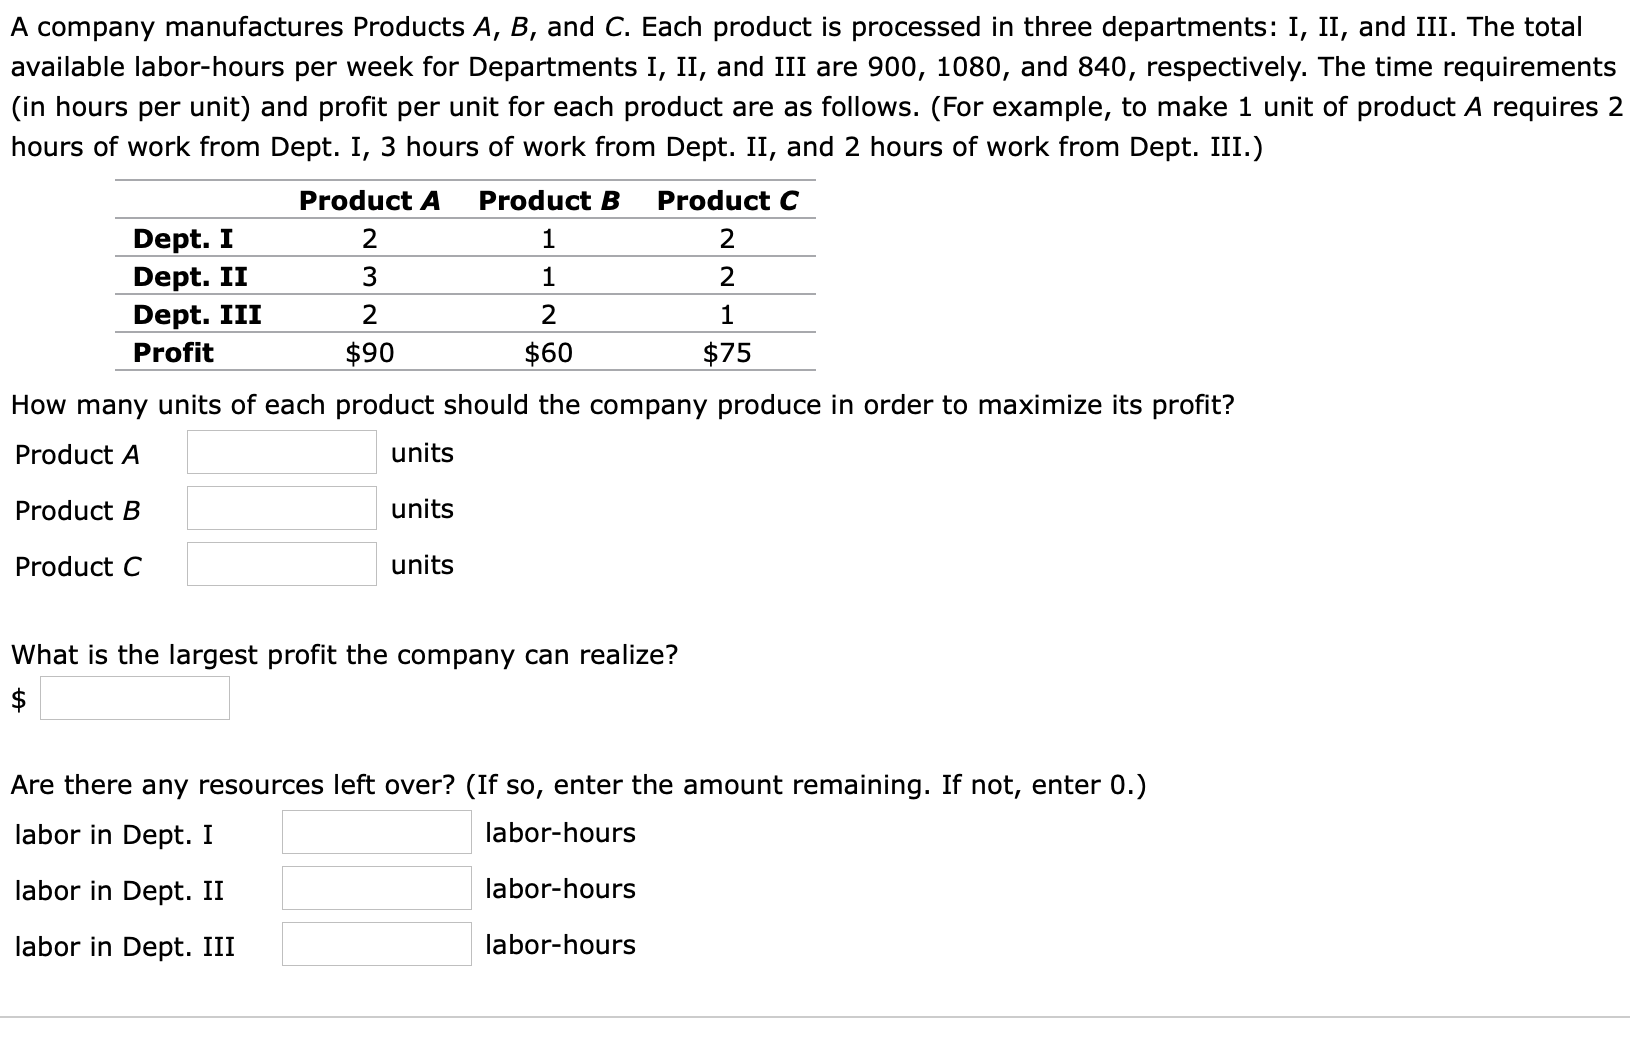 A company manufactures Products A, B, and C. Each product is processed in three departments: I, II, and III. The total
available labor-hours per week for Departments I, II, and III are 900, 1080, and 840, respectively. The time requirements
(in hours per unit) and profit per unit for each product are as follows. (For example, to make 1 unit of product A requires 2
hours of work from Dept. I, 3 hours of work from Dept. II, and 2 hours of work from Dept. III.)
Product A
Product B
Product C
Dept. I
Dept. II
2
1
3
2
1
2
Dept. III
1
Profit
$90
$60
$75
How many units of each product should the company produce in order to maximize its profit?
units
Product A
Product B
units
Product C
units
What is the largest profit the company can realize?
$
Are there any resources left over? (If so, enter the amount remaining. If not, enter 0.)
labor in Dept. I
labor-hours
labor in Dept. II
labor-hours
labor in Dept. III
labor-hours
